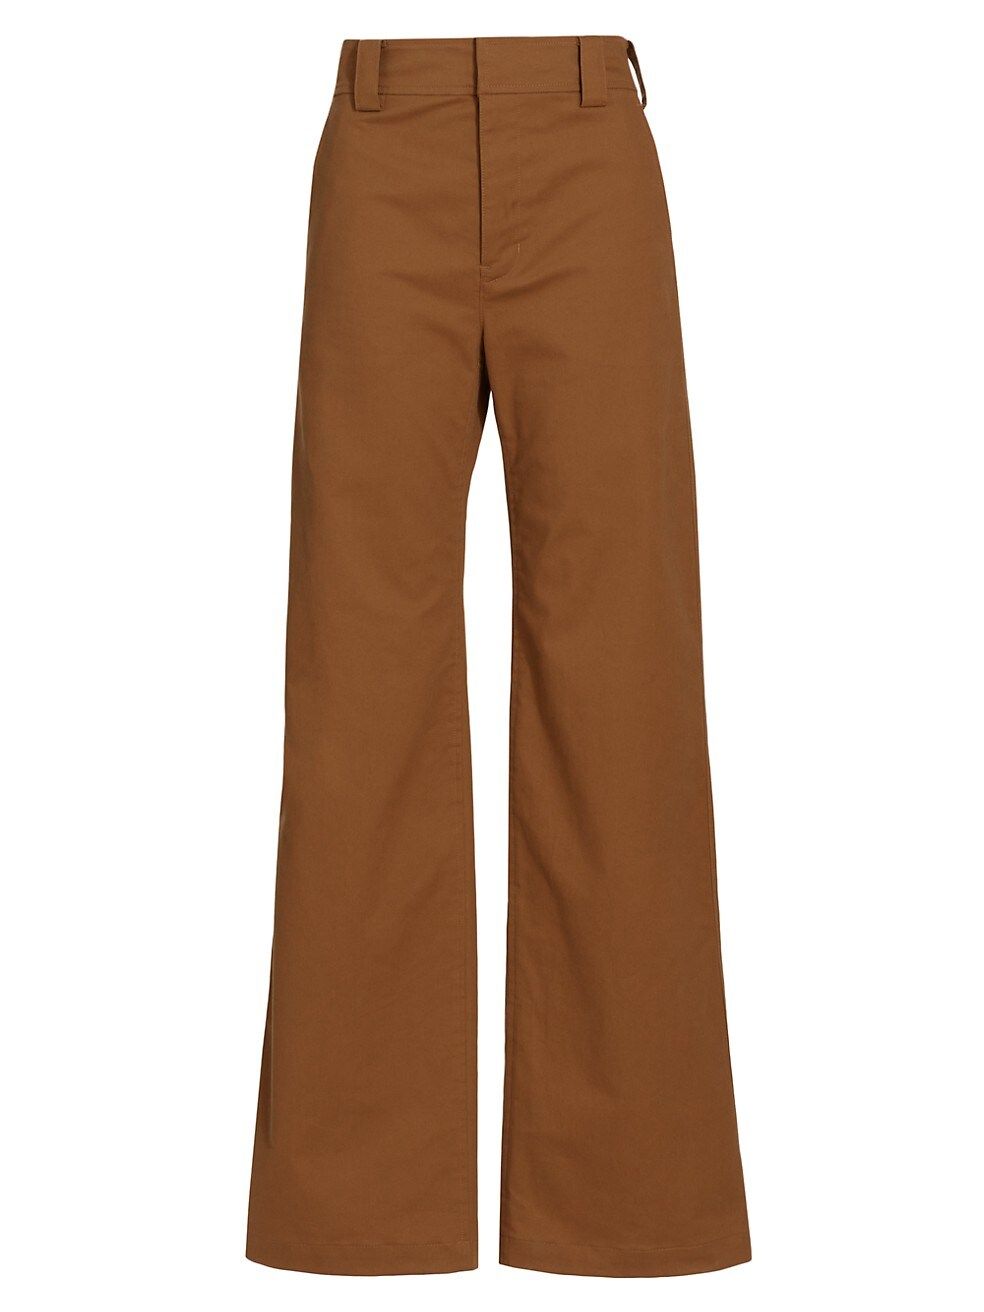 A.L.C. Lawrence Flared Pants | Saks Fifth Avenue